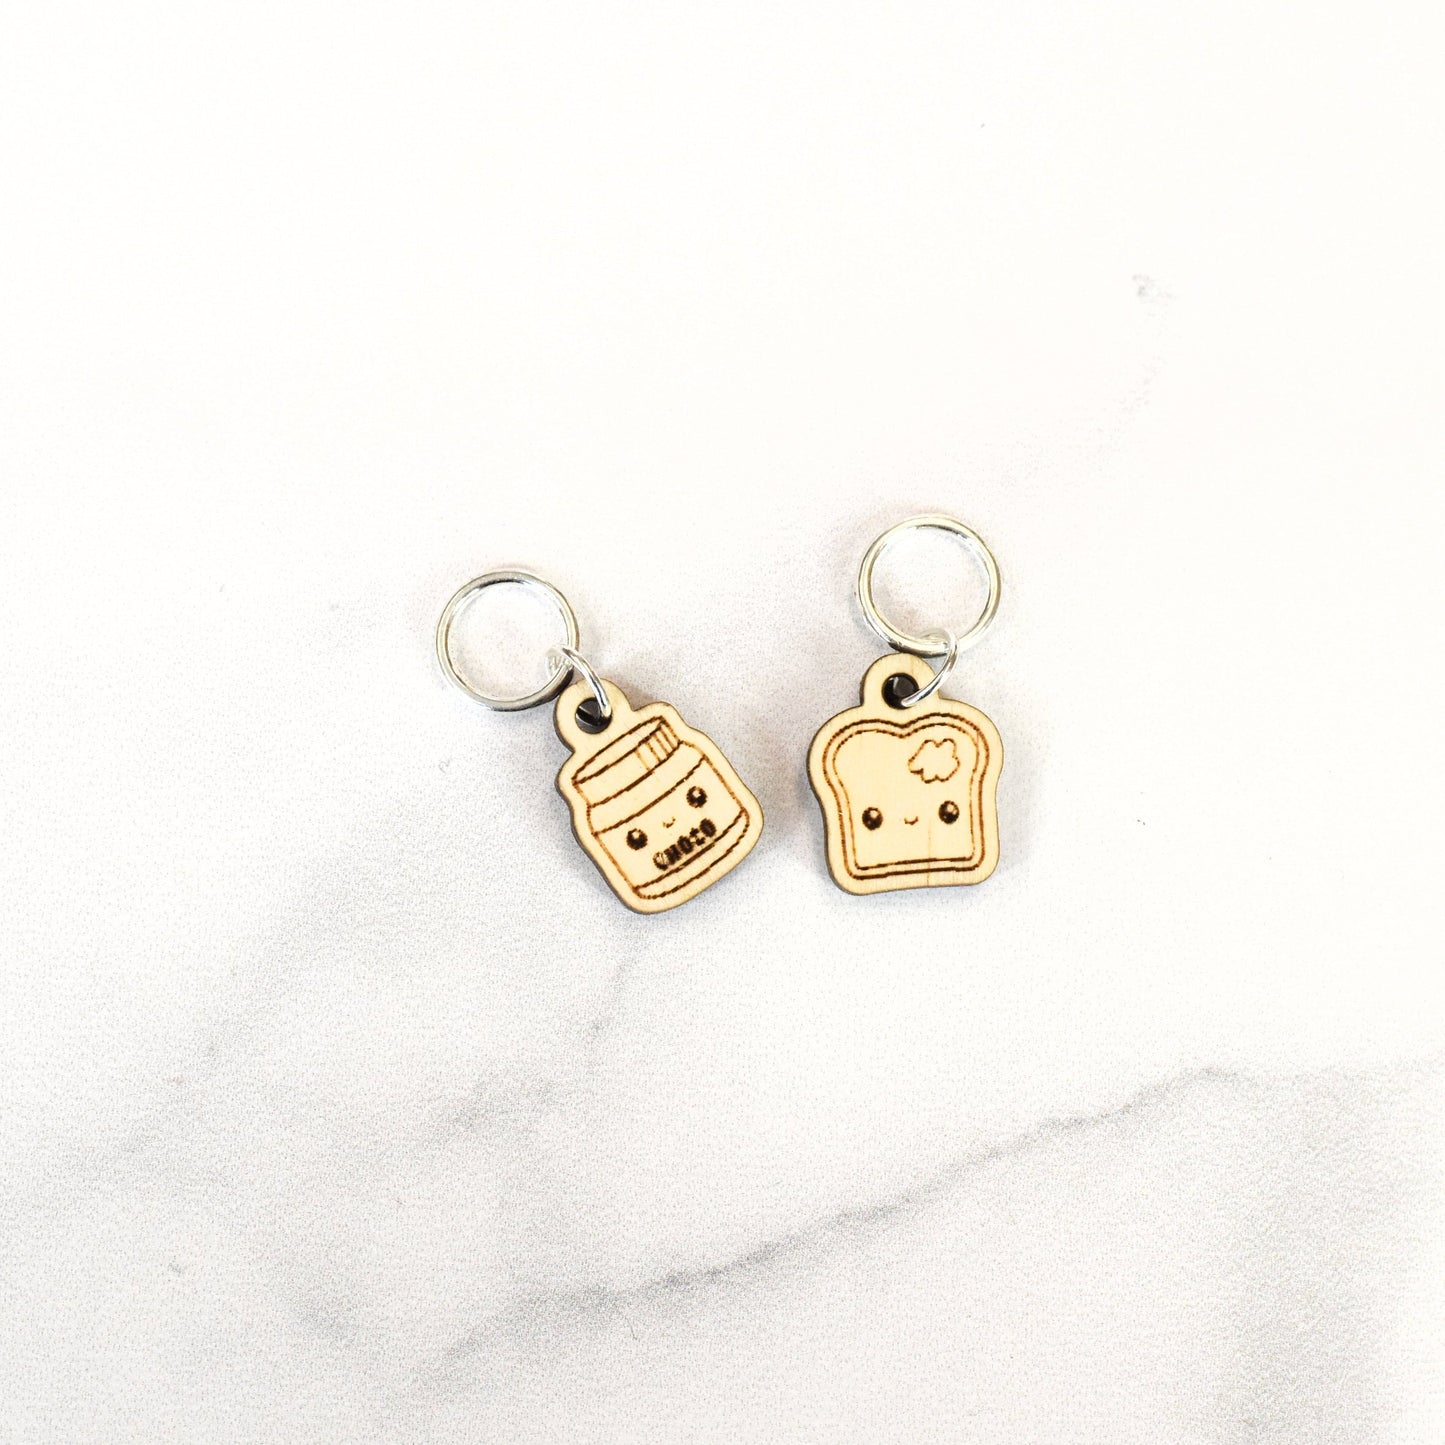 Set of 2 Laser Engraved Stitch Markers - Kawaii Toast and Chocolate Spread